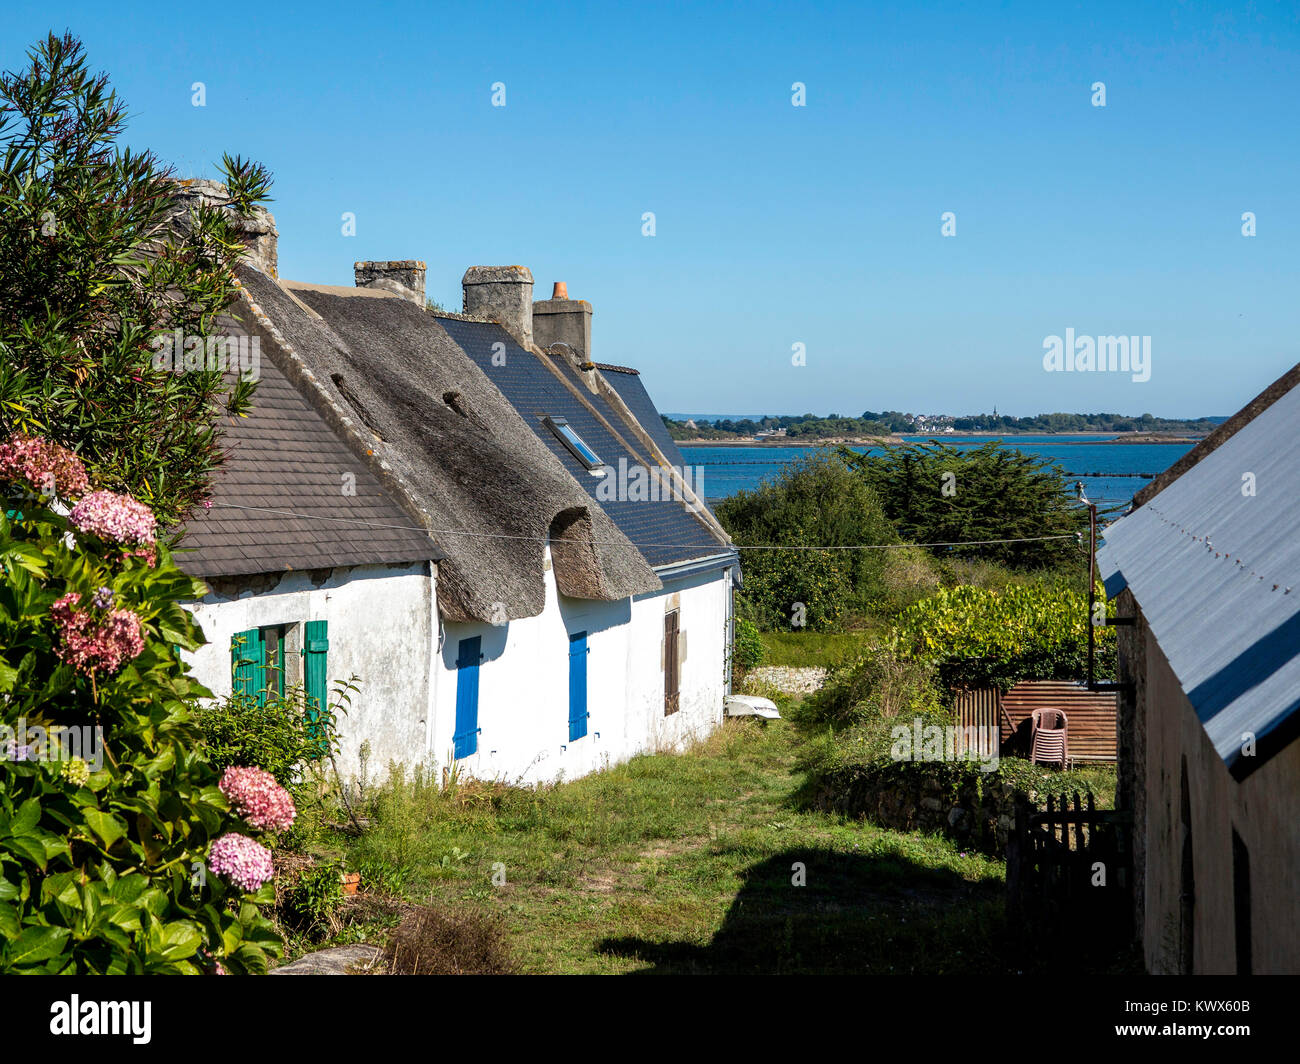 Holiday cottages photographed from the public road on Iles aux Moines in the Morbihan, Brittany, France. Stock Photo